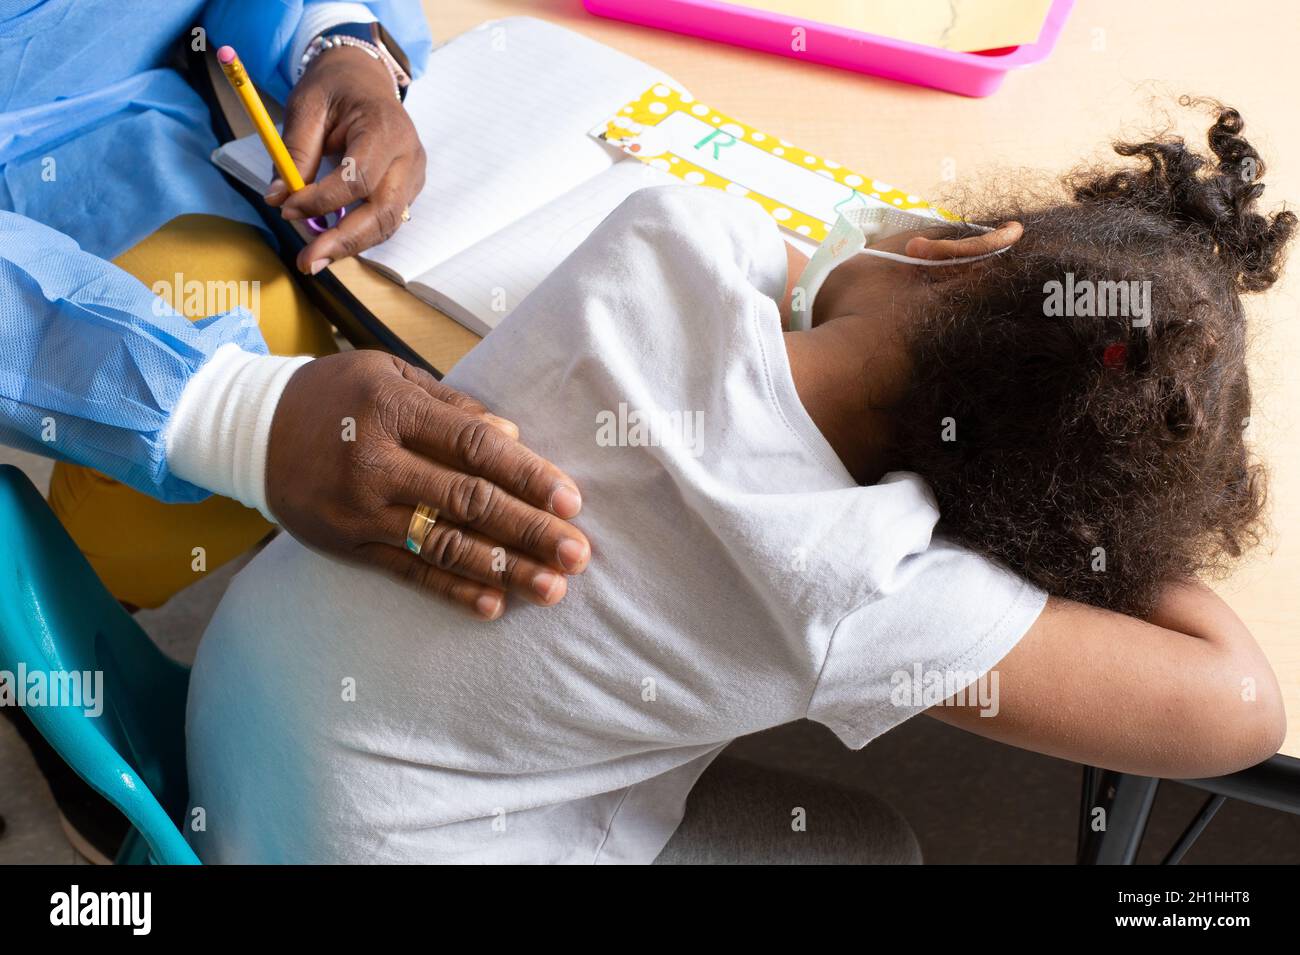 Education Preschool 3-4 year olds girl laying head on table, sad or tired at start of school day, teacher patting her on the back, wearing face mask Stock Photo